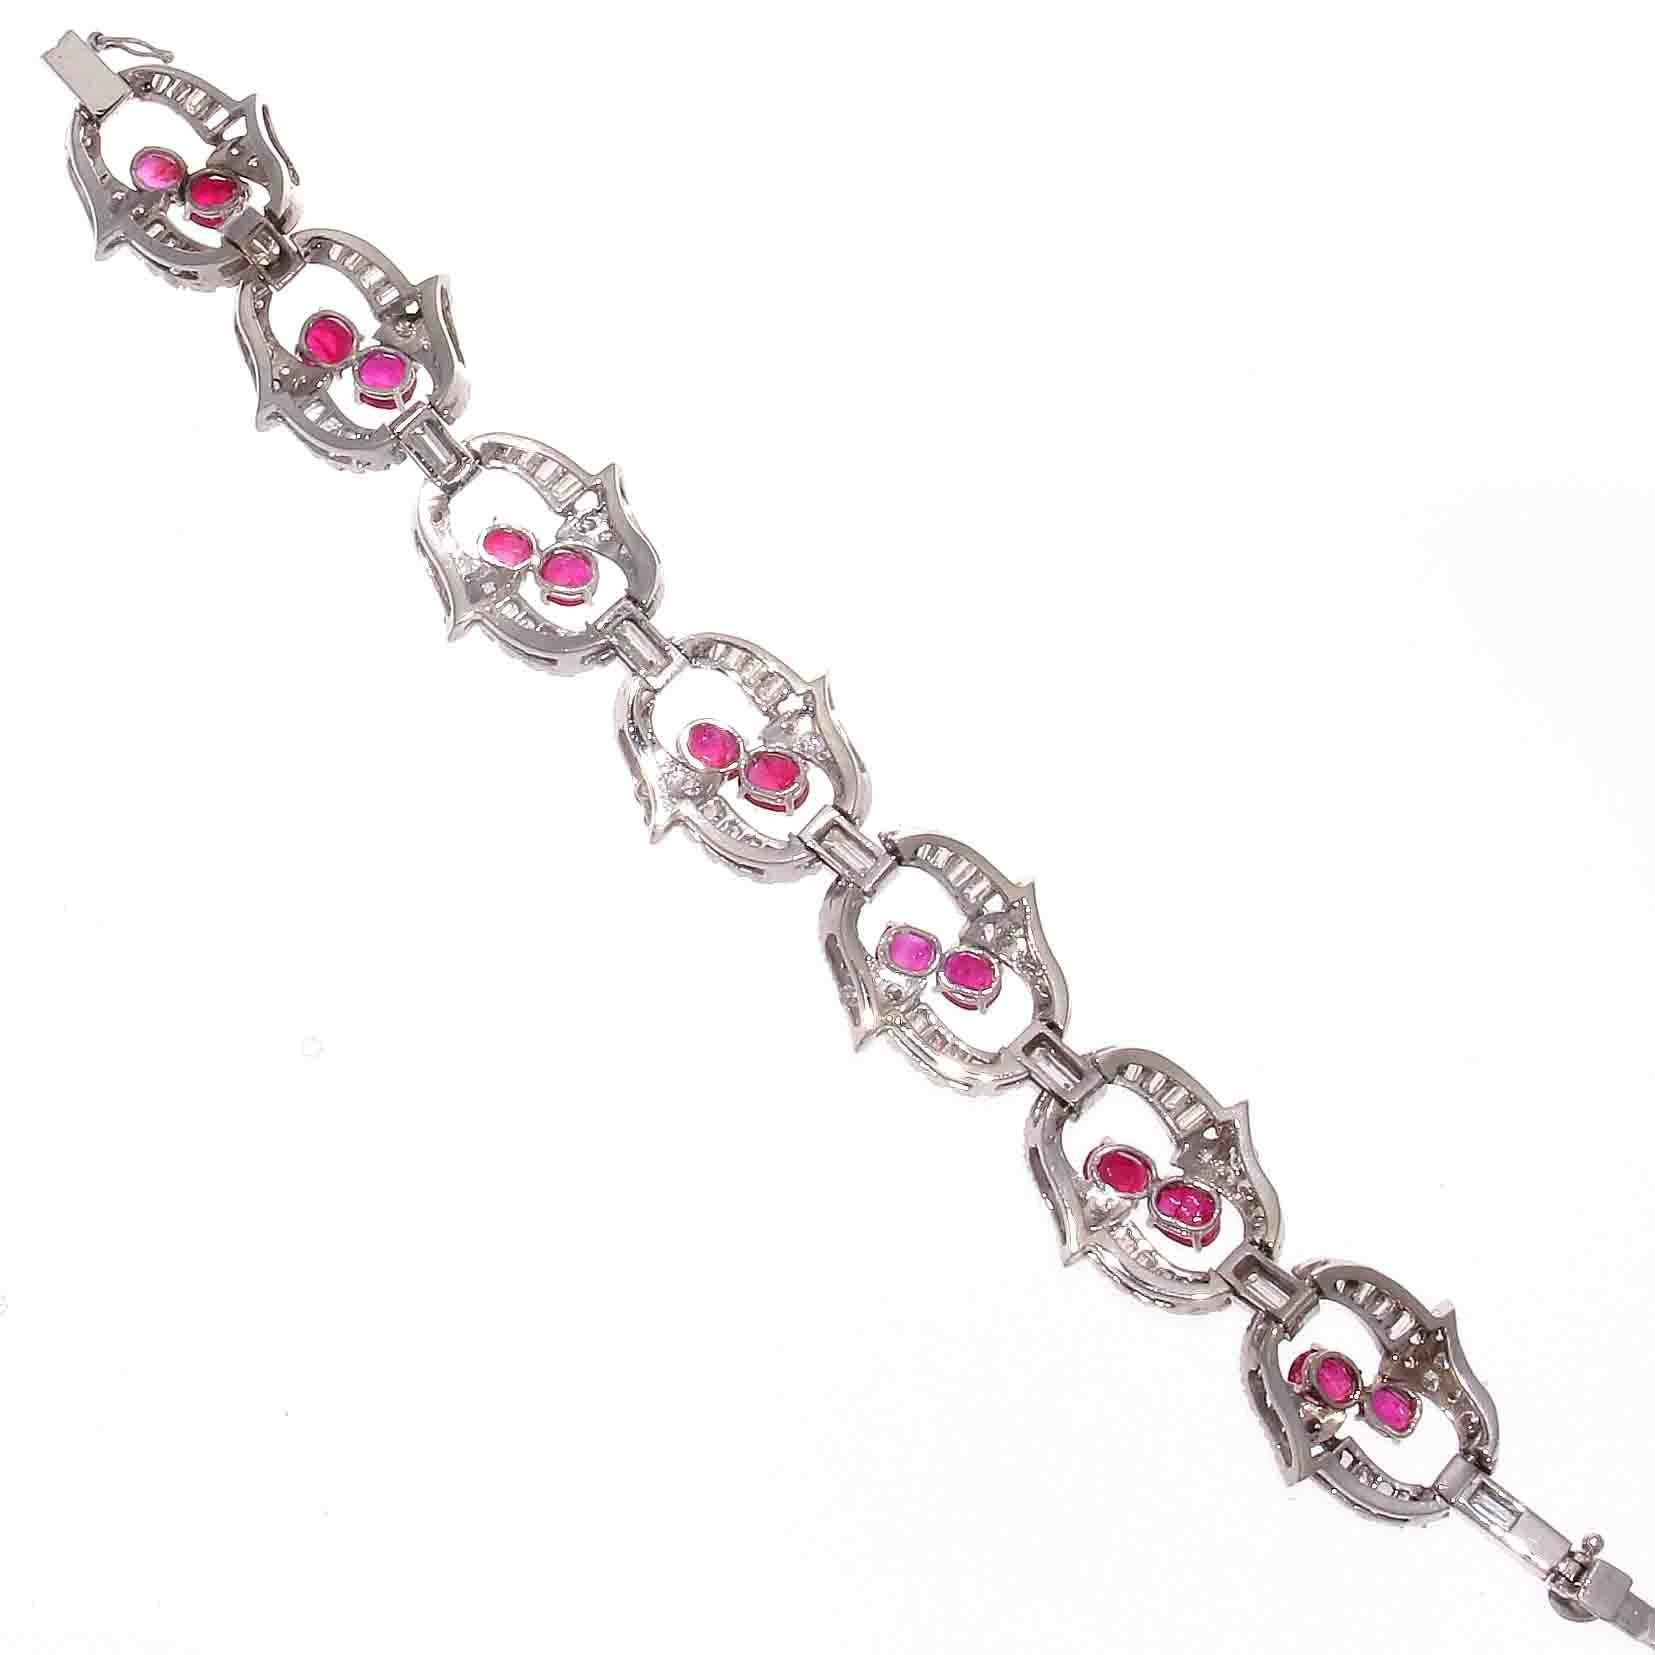 Beautiful midcentury bracelet. Featuring Burma rubies and near colorless diamond. Crafted in platinum. 